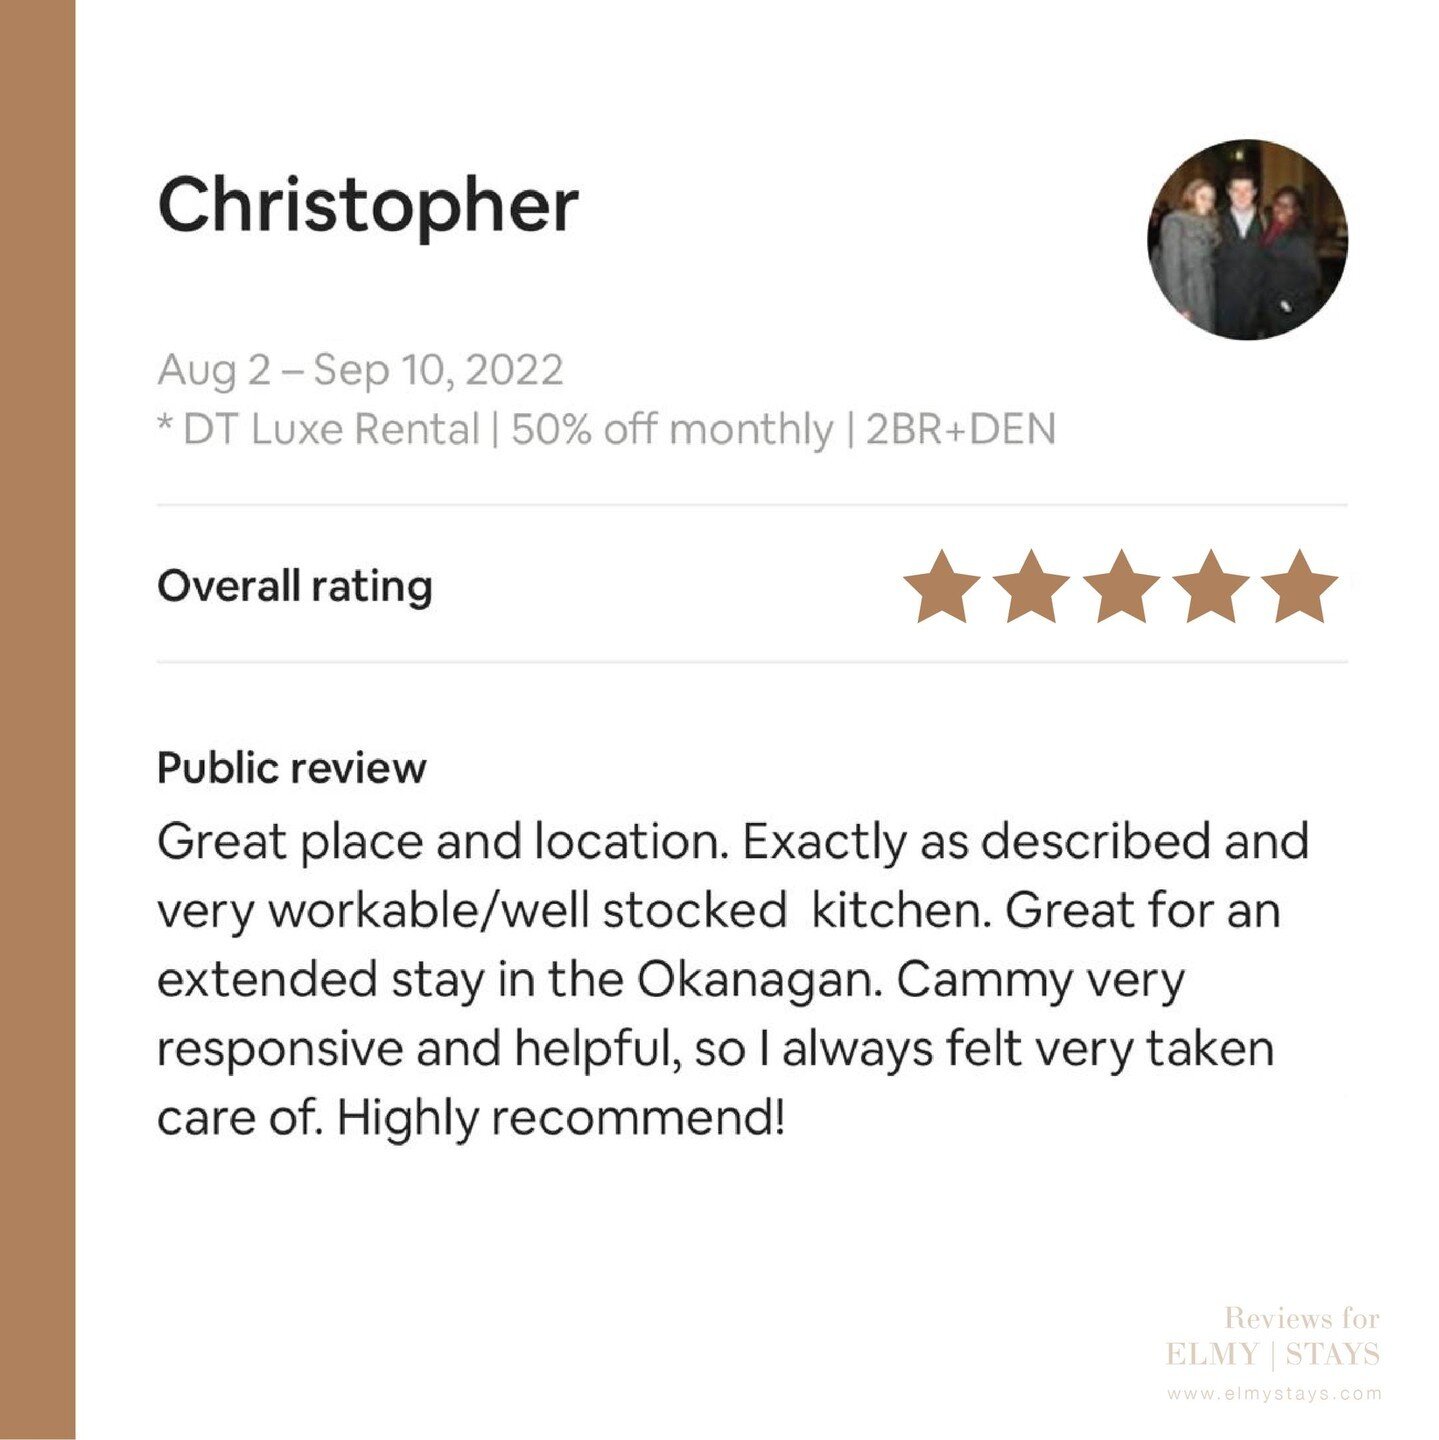 💌 Thank you Christopher for your awesome 5 star review of our Blue Hues condo in Downtown Kelowna! We are glad you enjoyed both our service and our home :)⁠
⁠
It's true, our home is located in Downtown Kelowna right next to Waterfront Park with tons